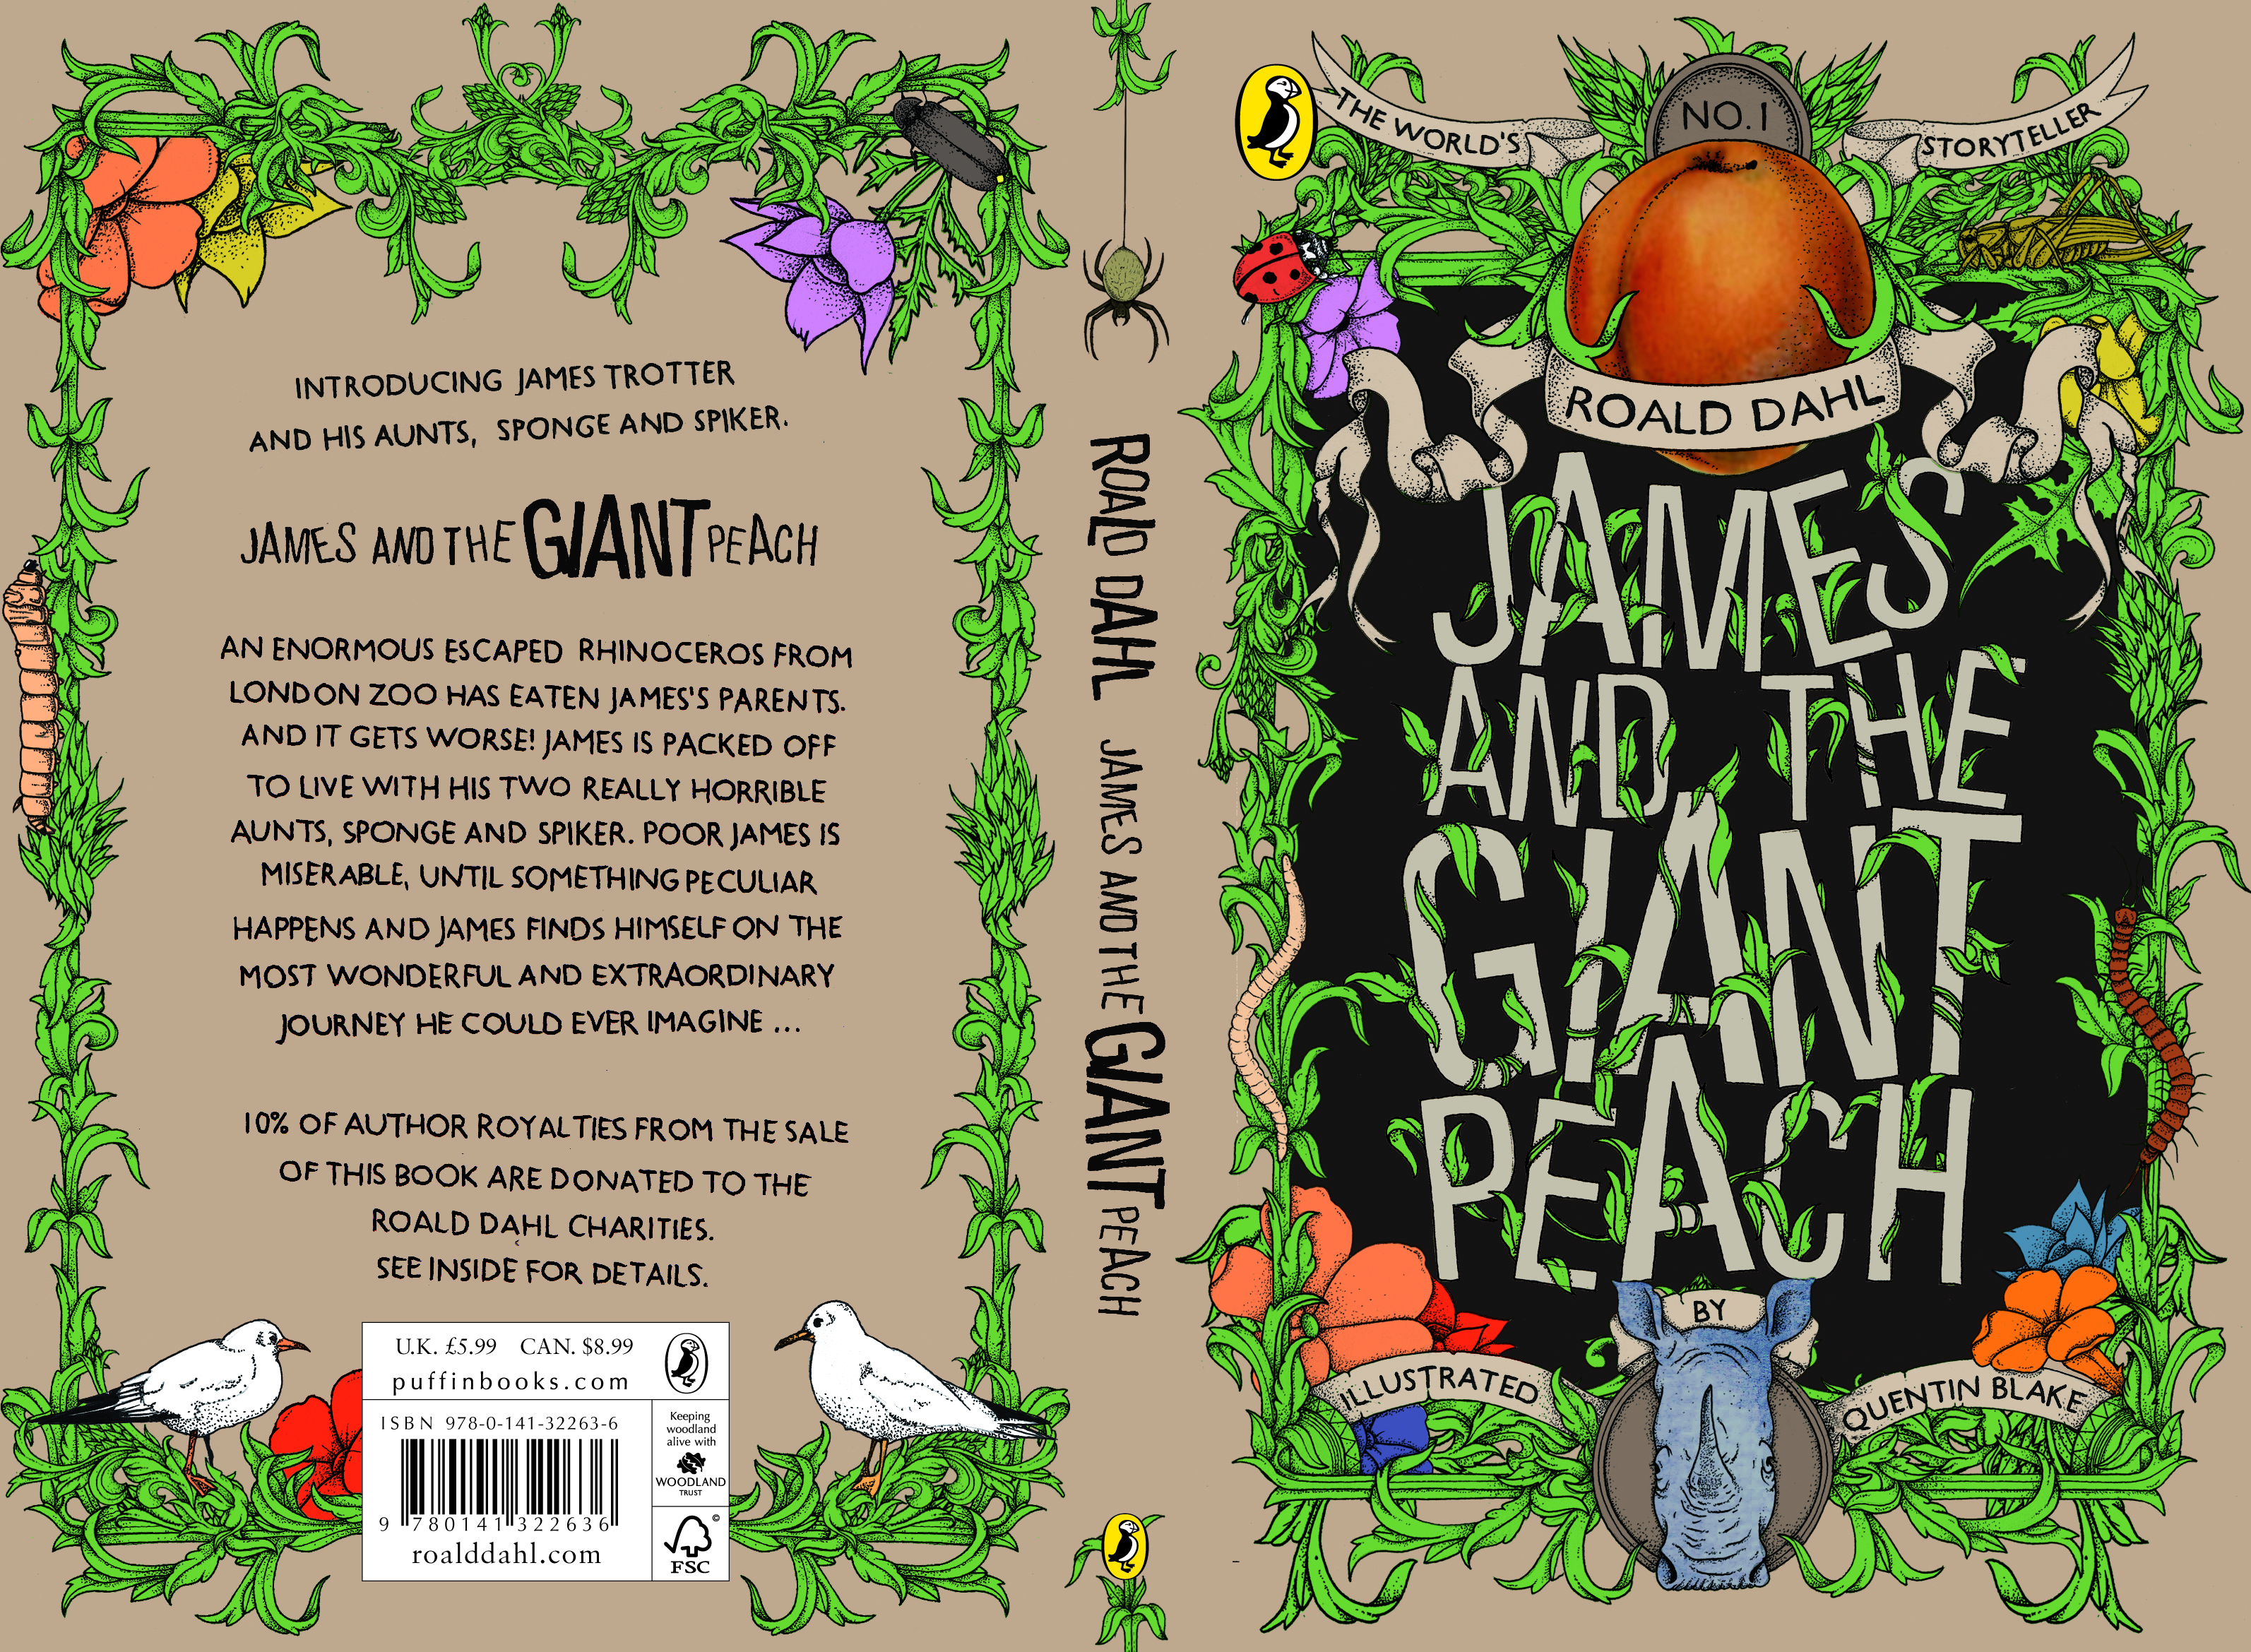 James and the Giant Peach book cover design